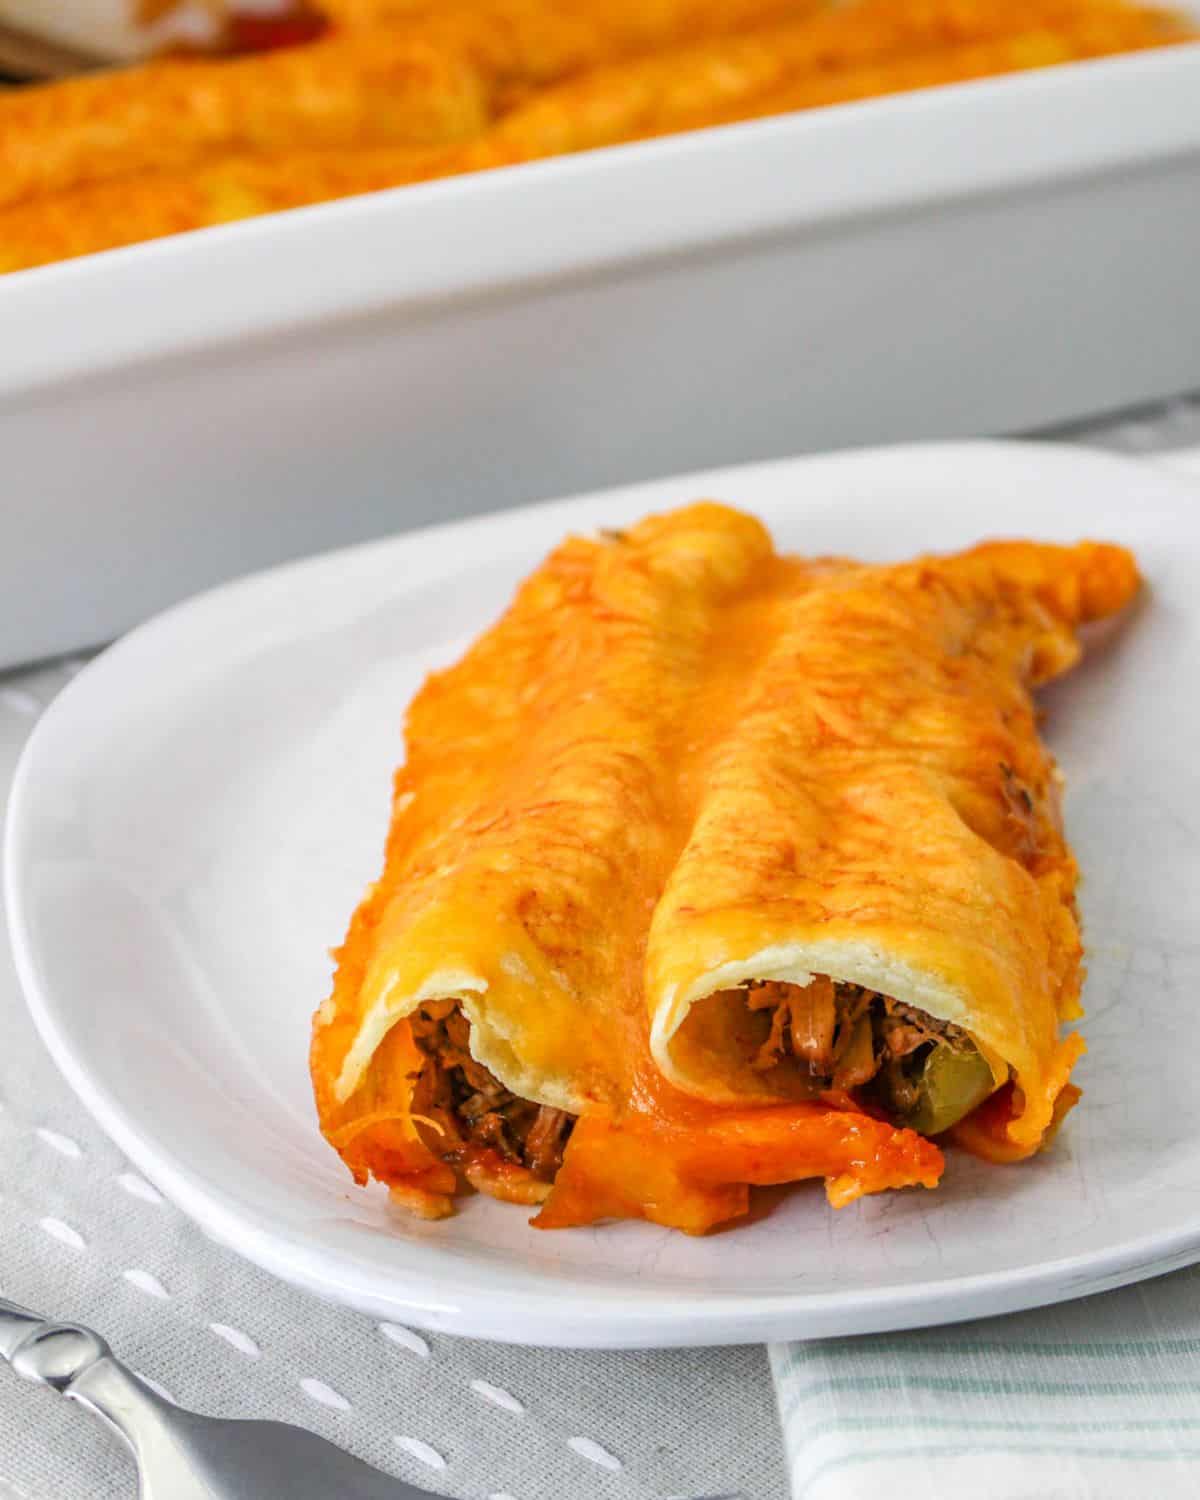 Shredded beef enchiladas made with leftover beef topped with cheese.